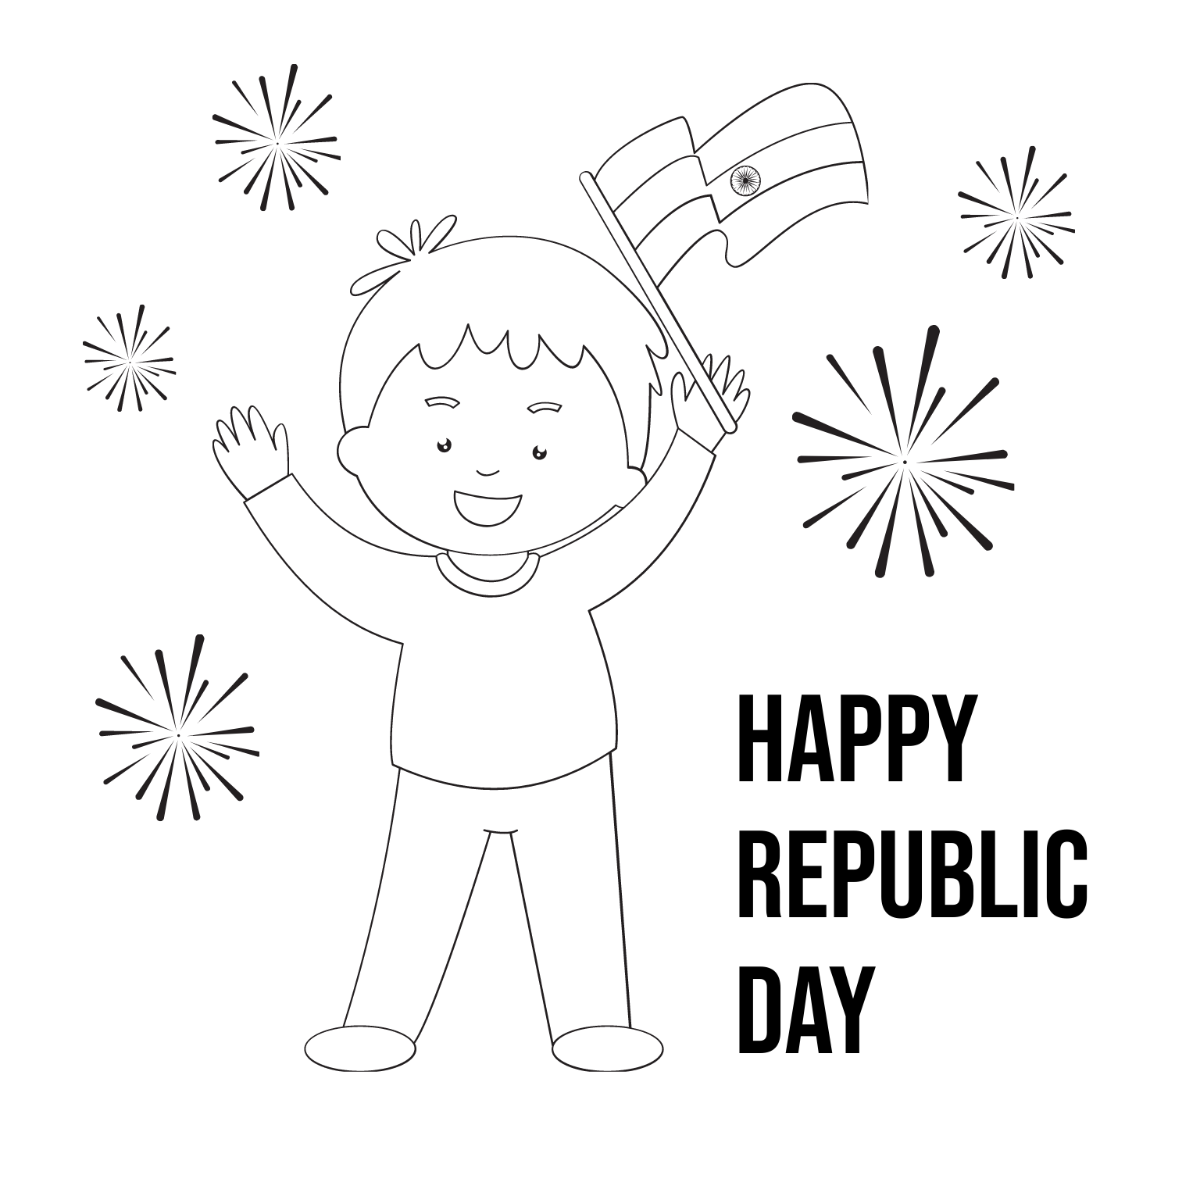 Republic Day Drawing | Republic Day Poster | 26 January Drawing | Easy Republic  Day Drawing | Independence day drawing, Republic day, Independence day  poster